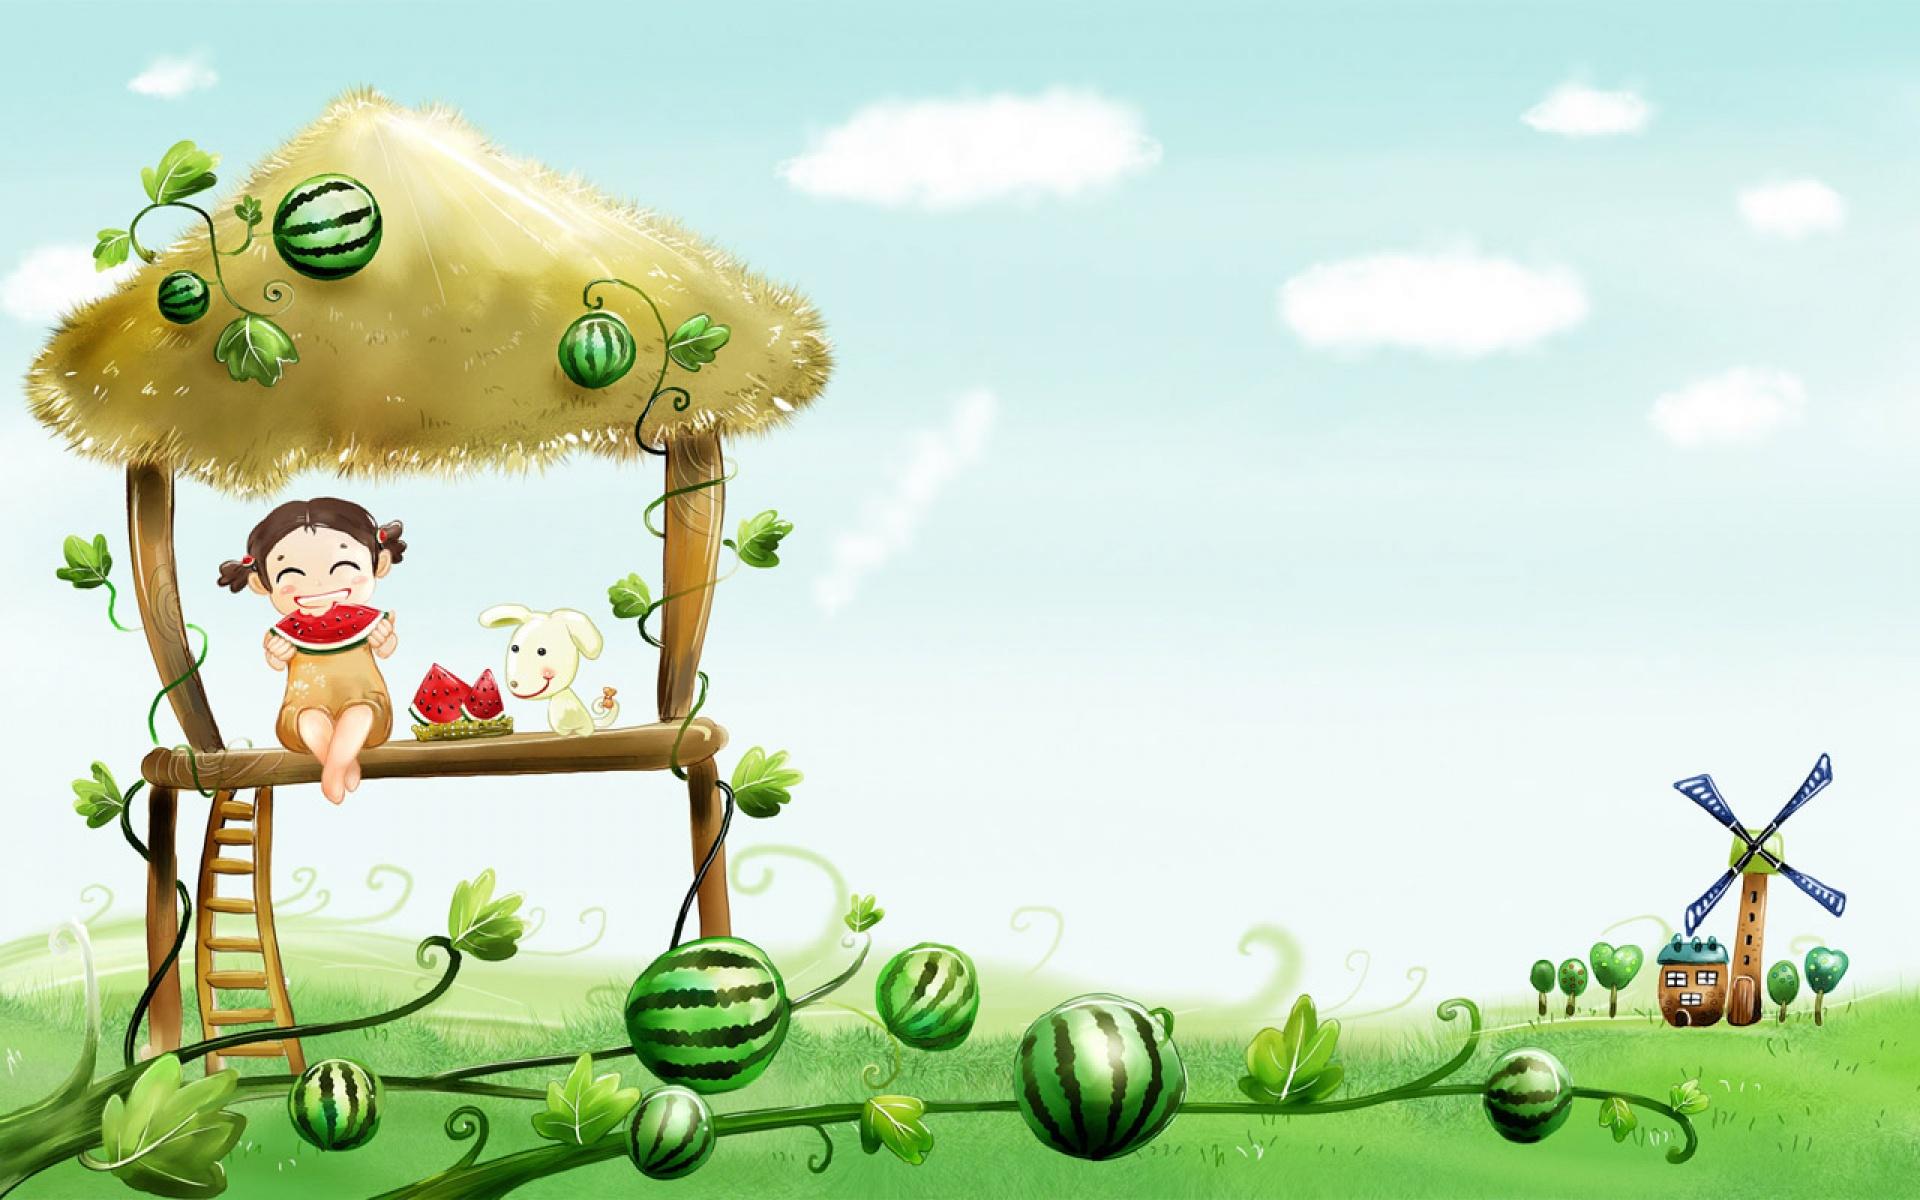 Cute Animations Wallpapers - Wallpaper Cave